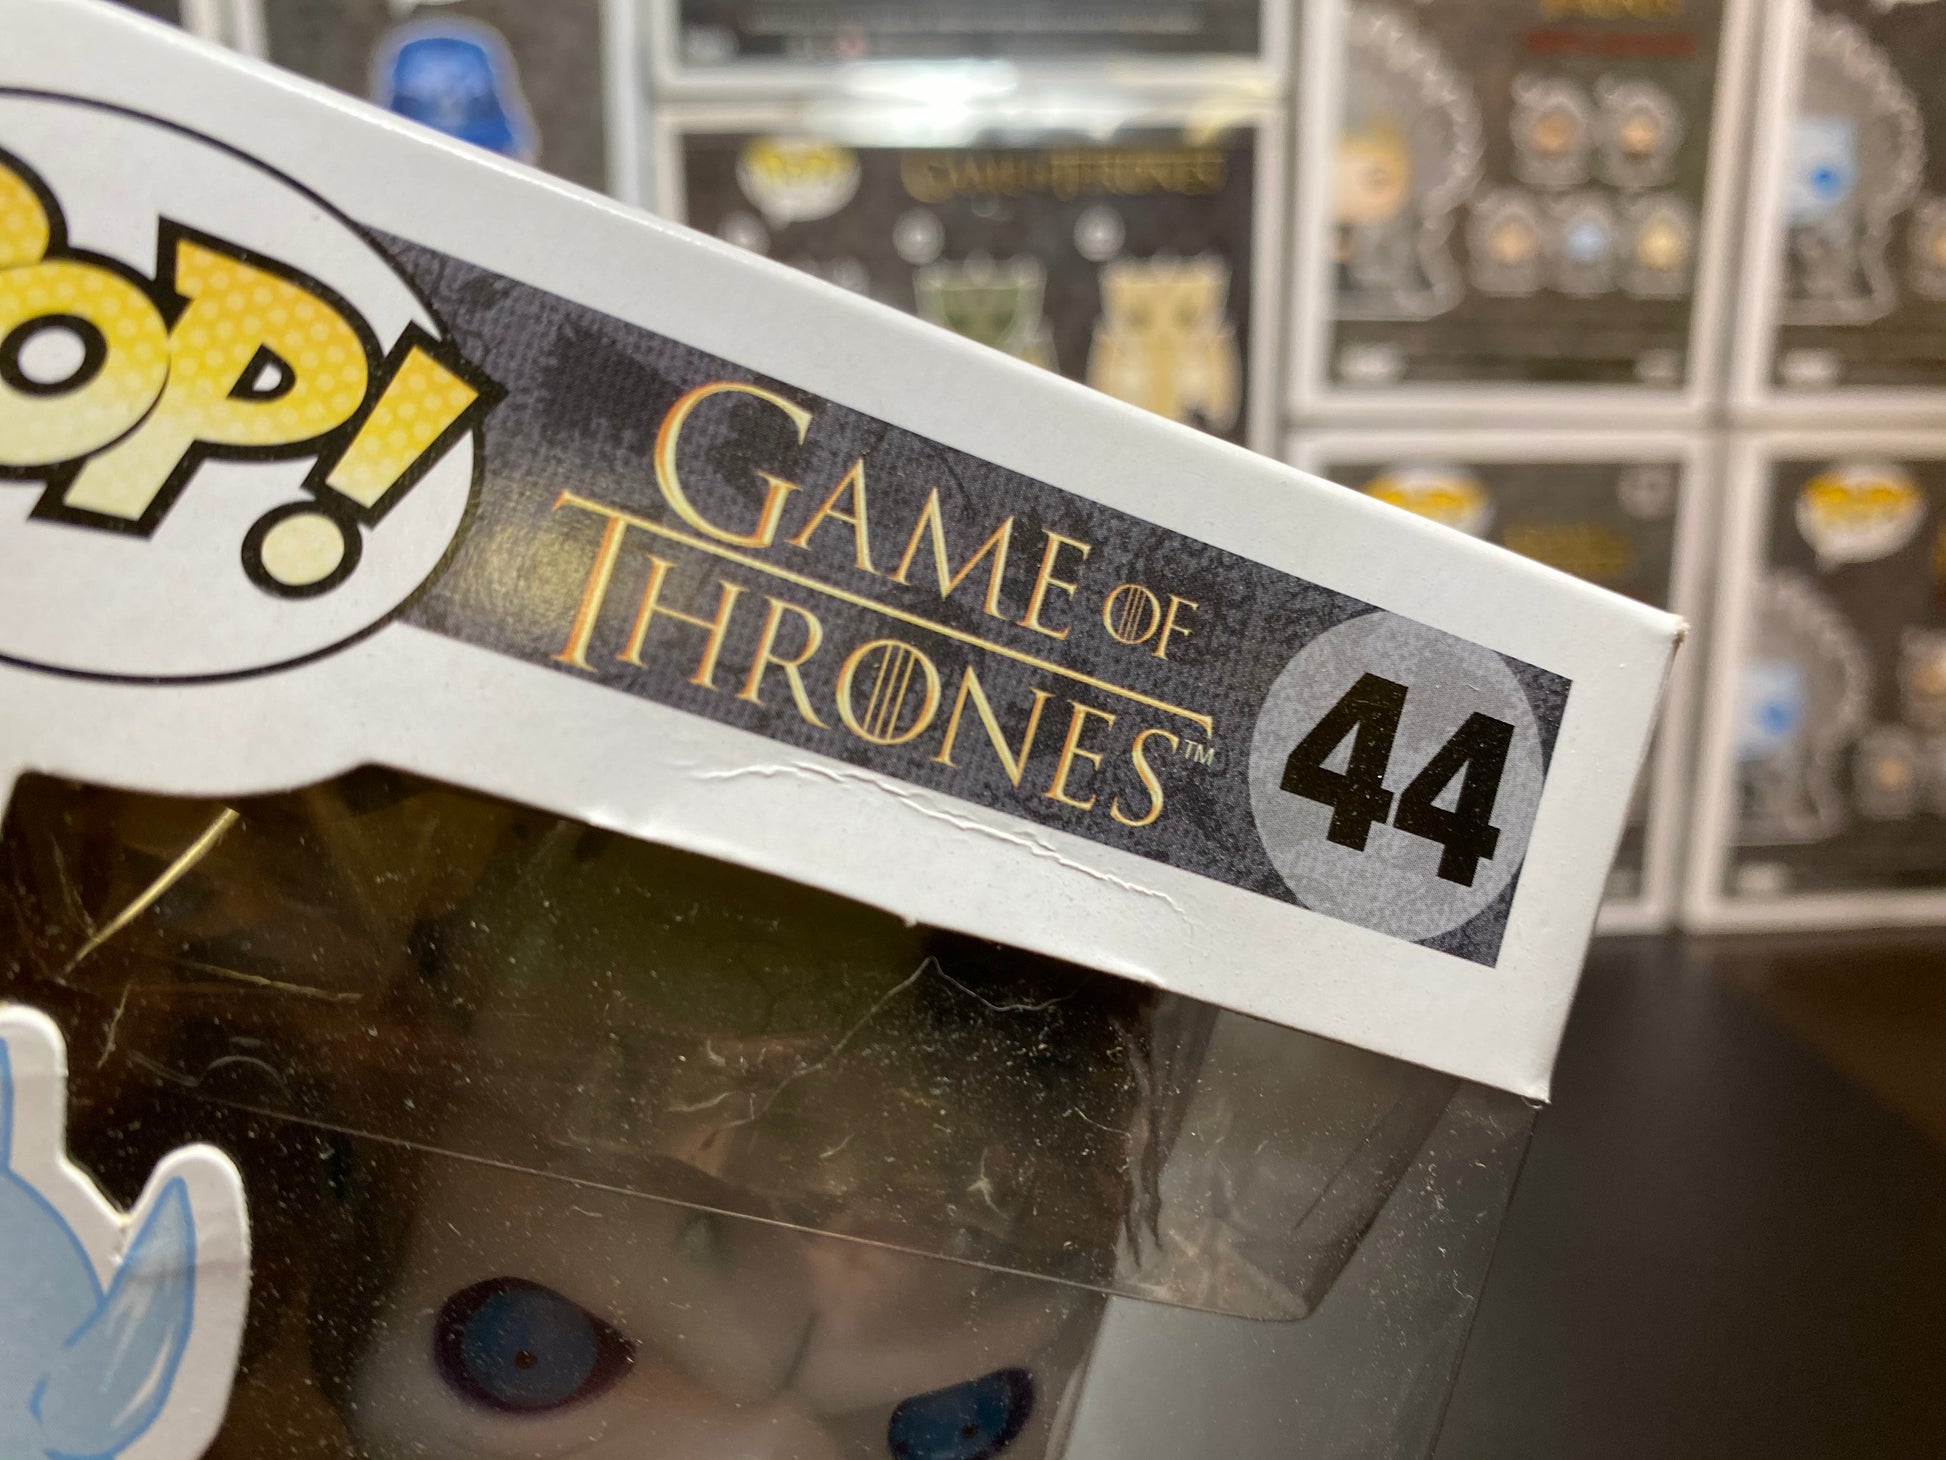 POP Game of Thrones: Night King - Star's Toy Shop